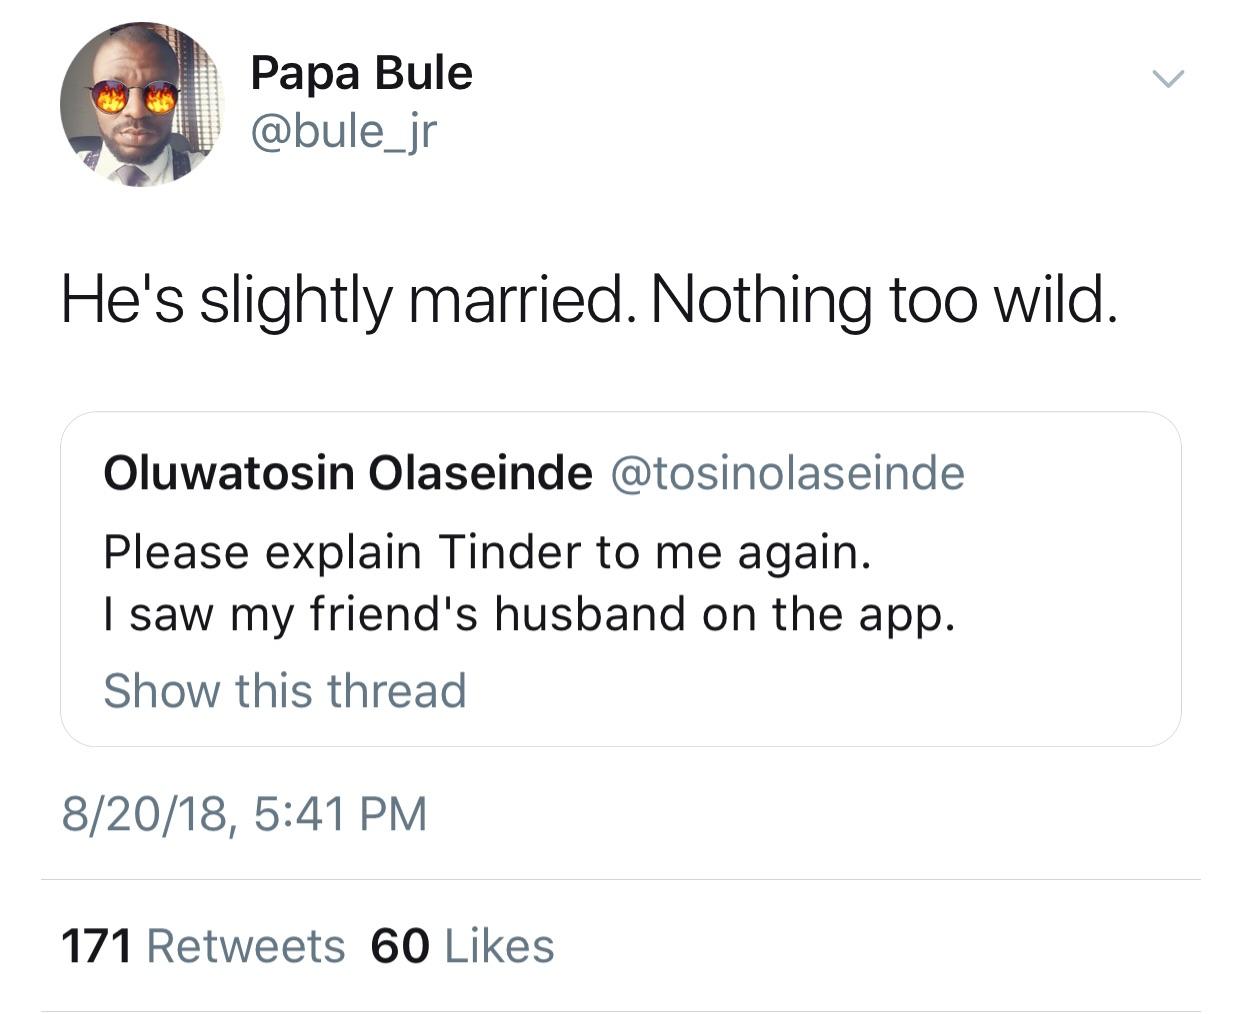 angle - Papa Bule He's slightly married. Nothing too wild. Oluwatosin Olaseinde Please explain Tinder to me again. | saw my friend's husband on the app. Show this thread 82018, 171 60